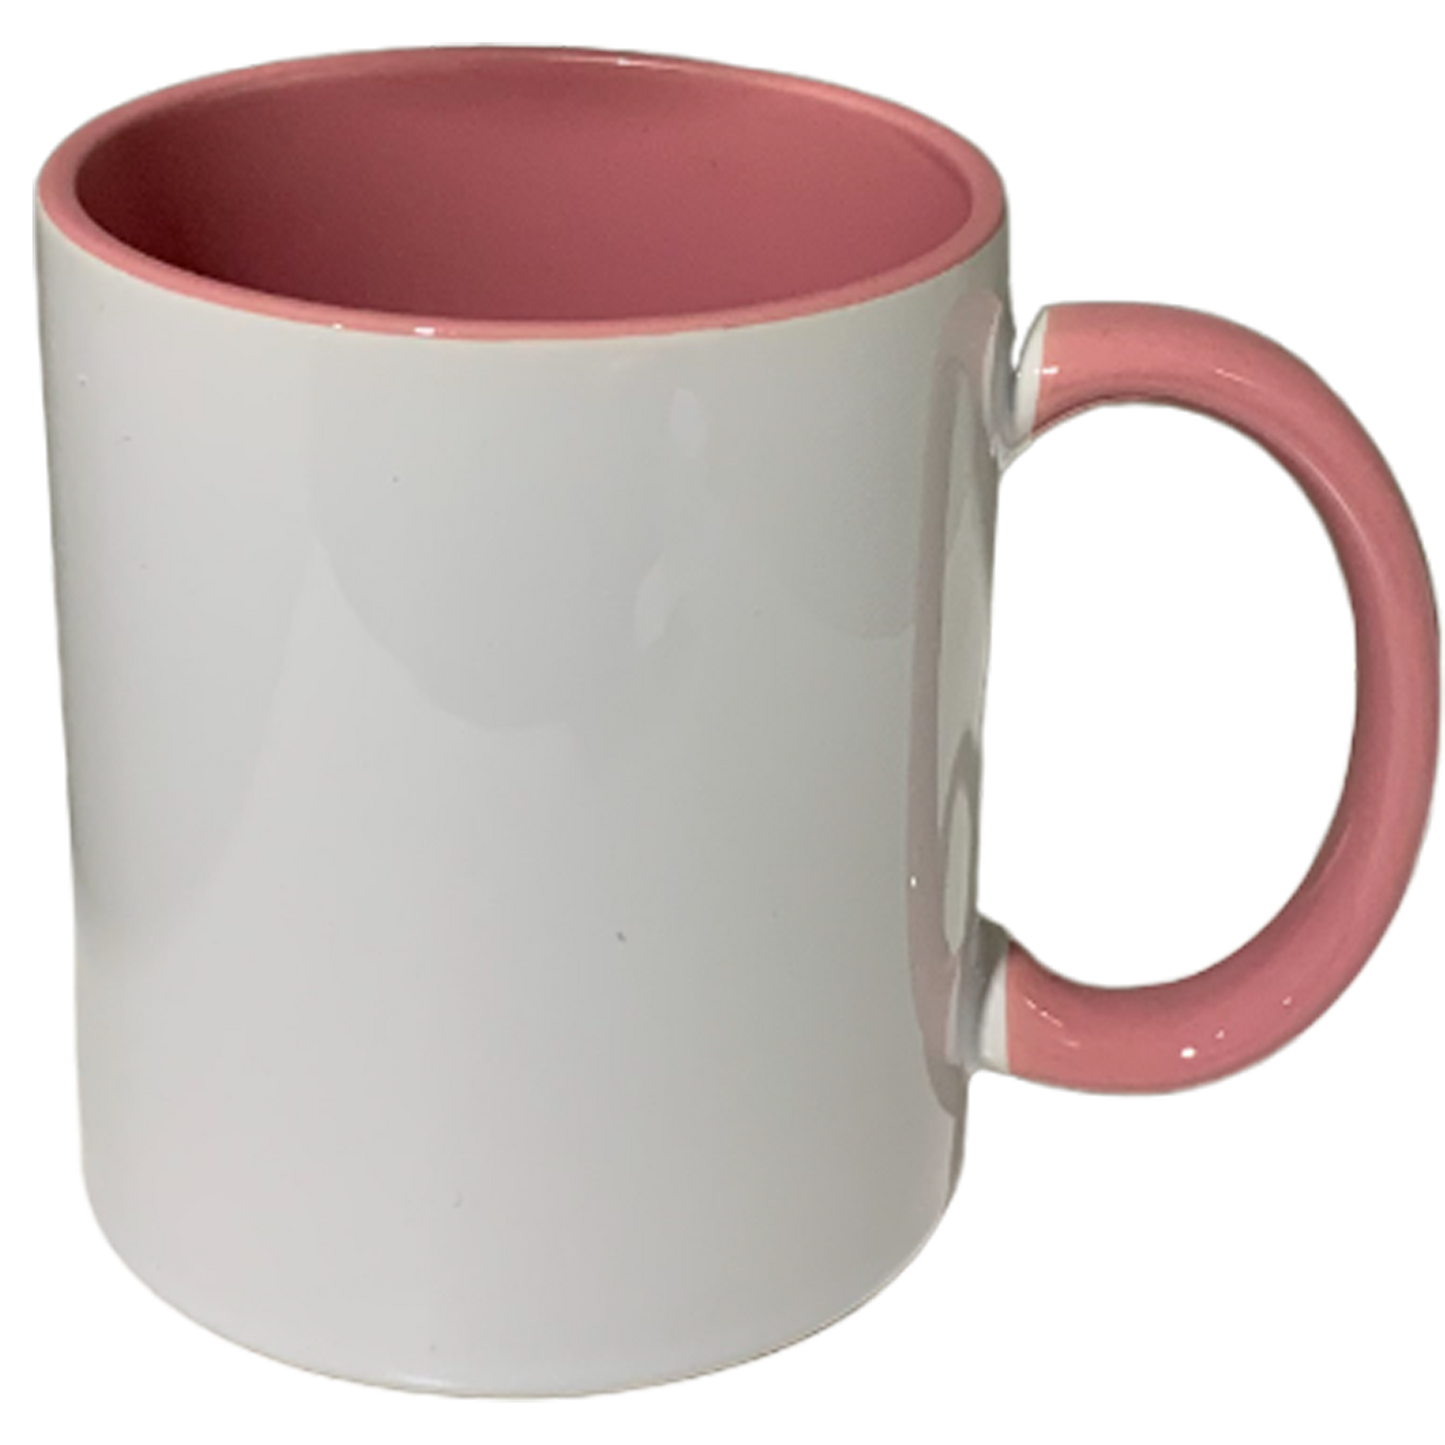 6 PACK -11 once White sublimation mugs inner color PINK  and handle with reinforced foam box packaging